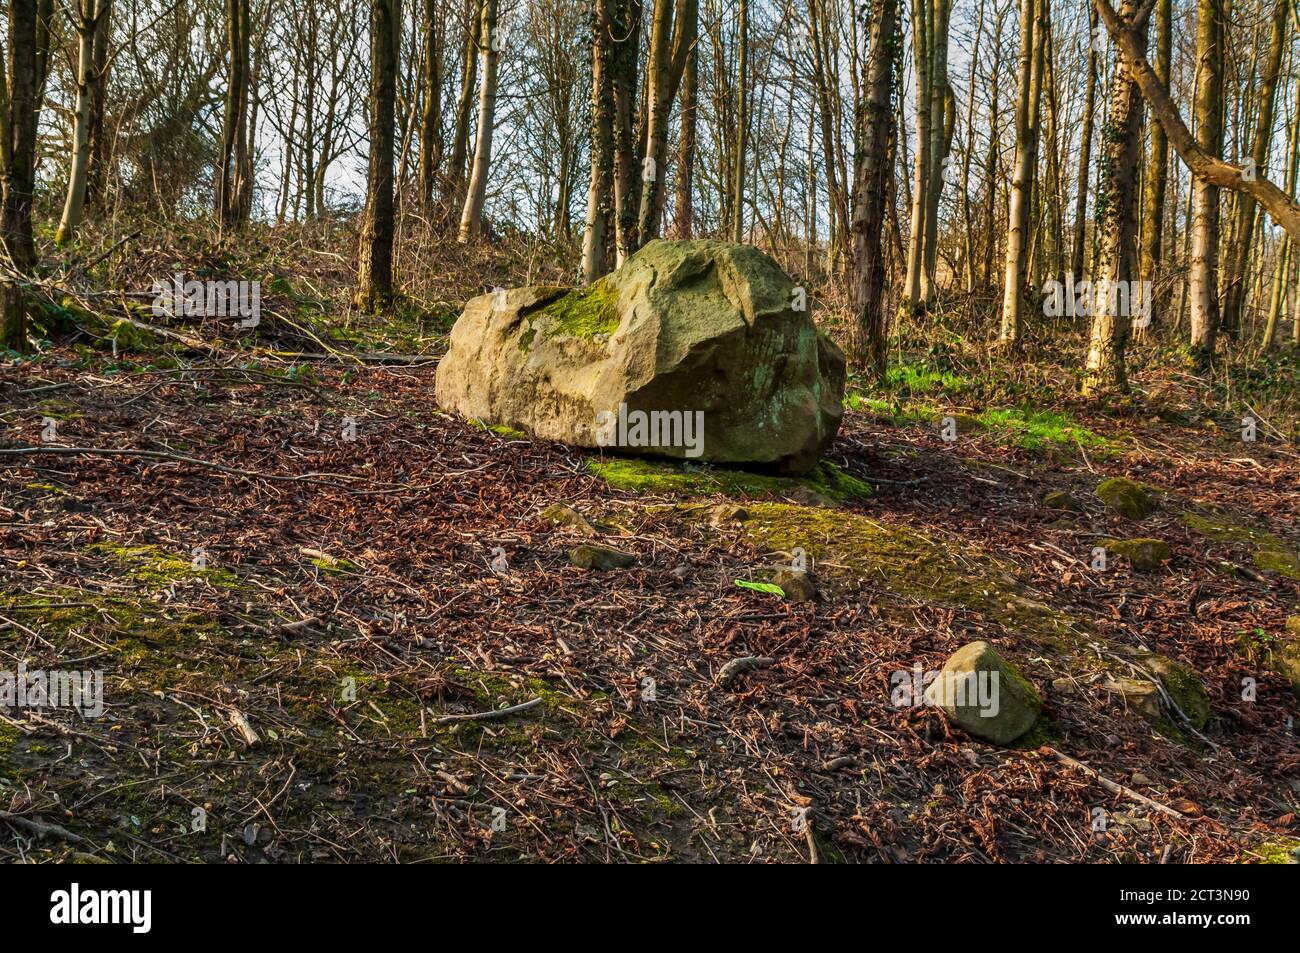 Large single gritstone boulder at Ryecroft Glen in Ecclesall Woods, ancient woodland in Sheffield. Stock Photo